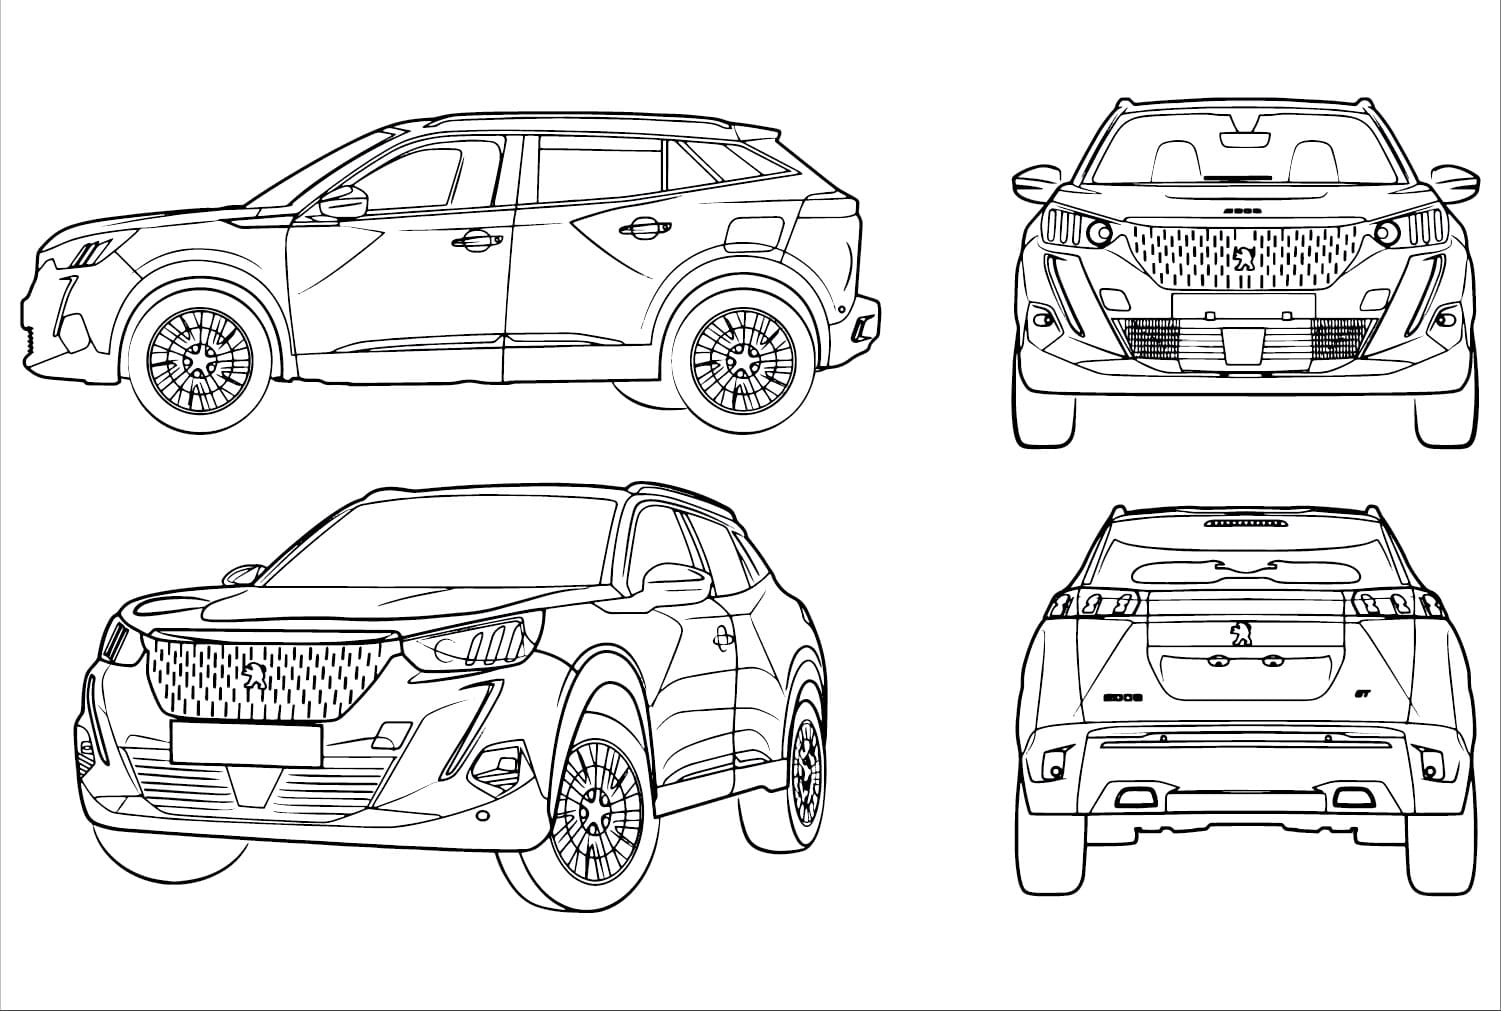 toyota corolla coloring pages